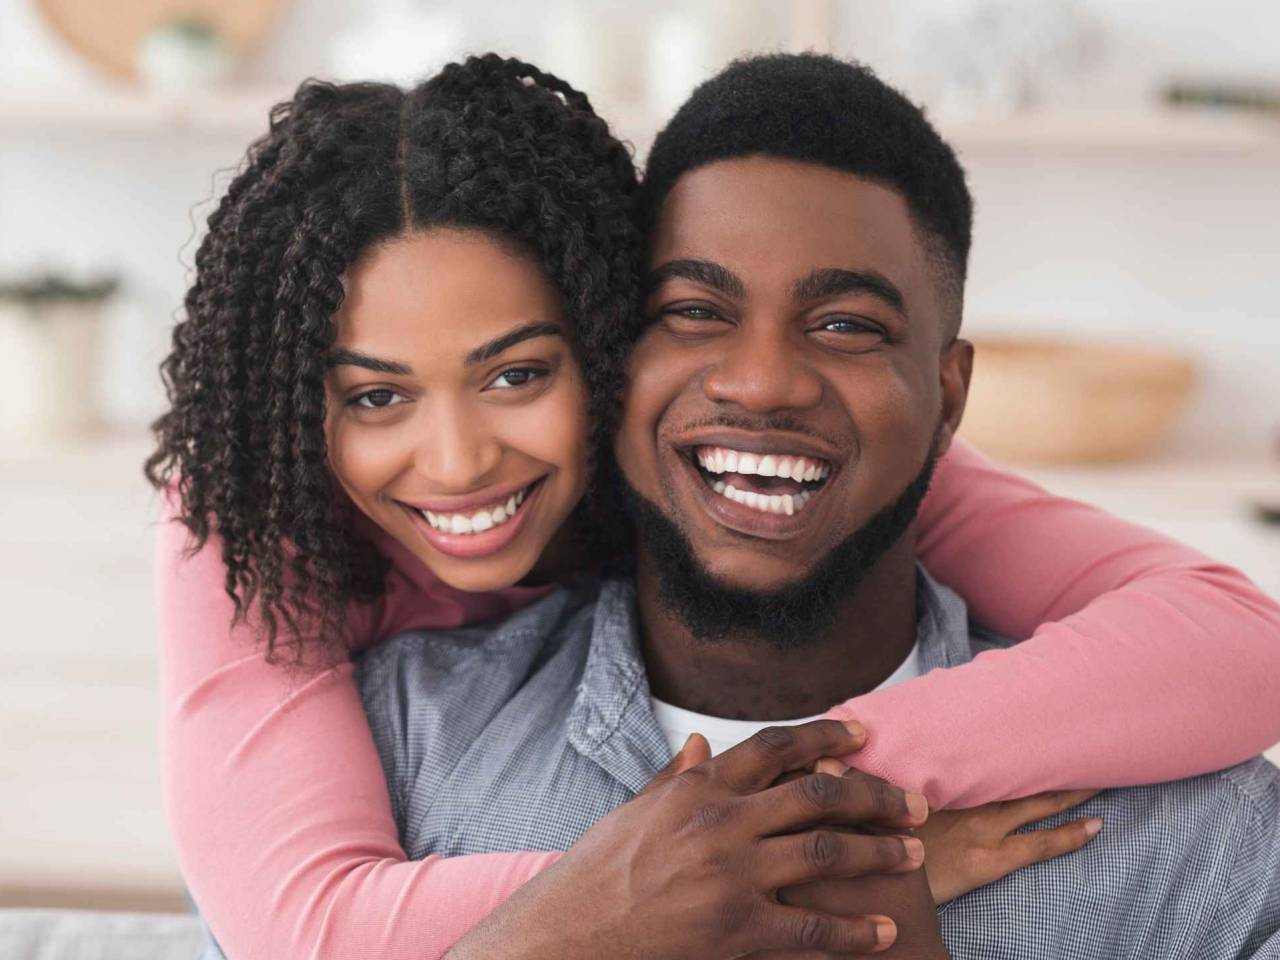 Portrait Of Loving African American Couple Hugging At Home And Looking At Camera, Spending Quarantine Together